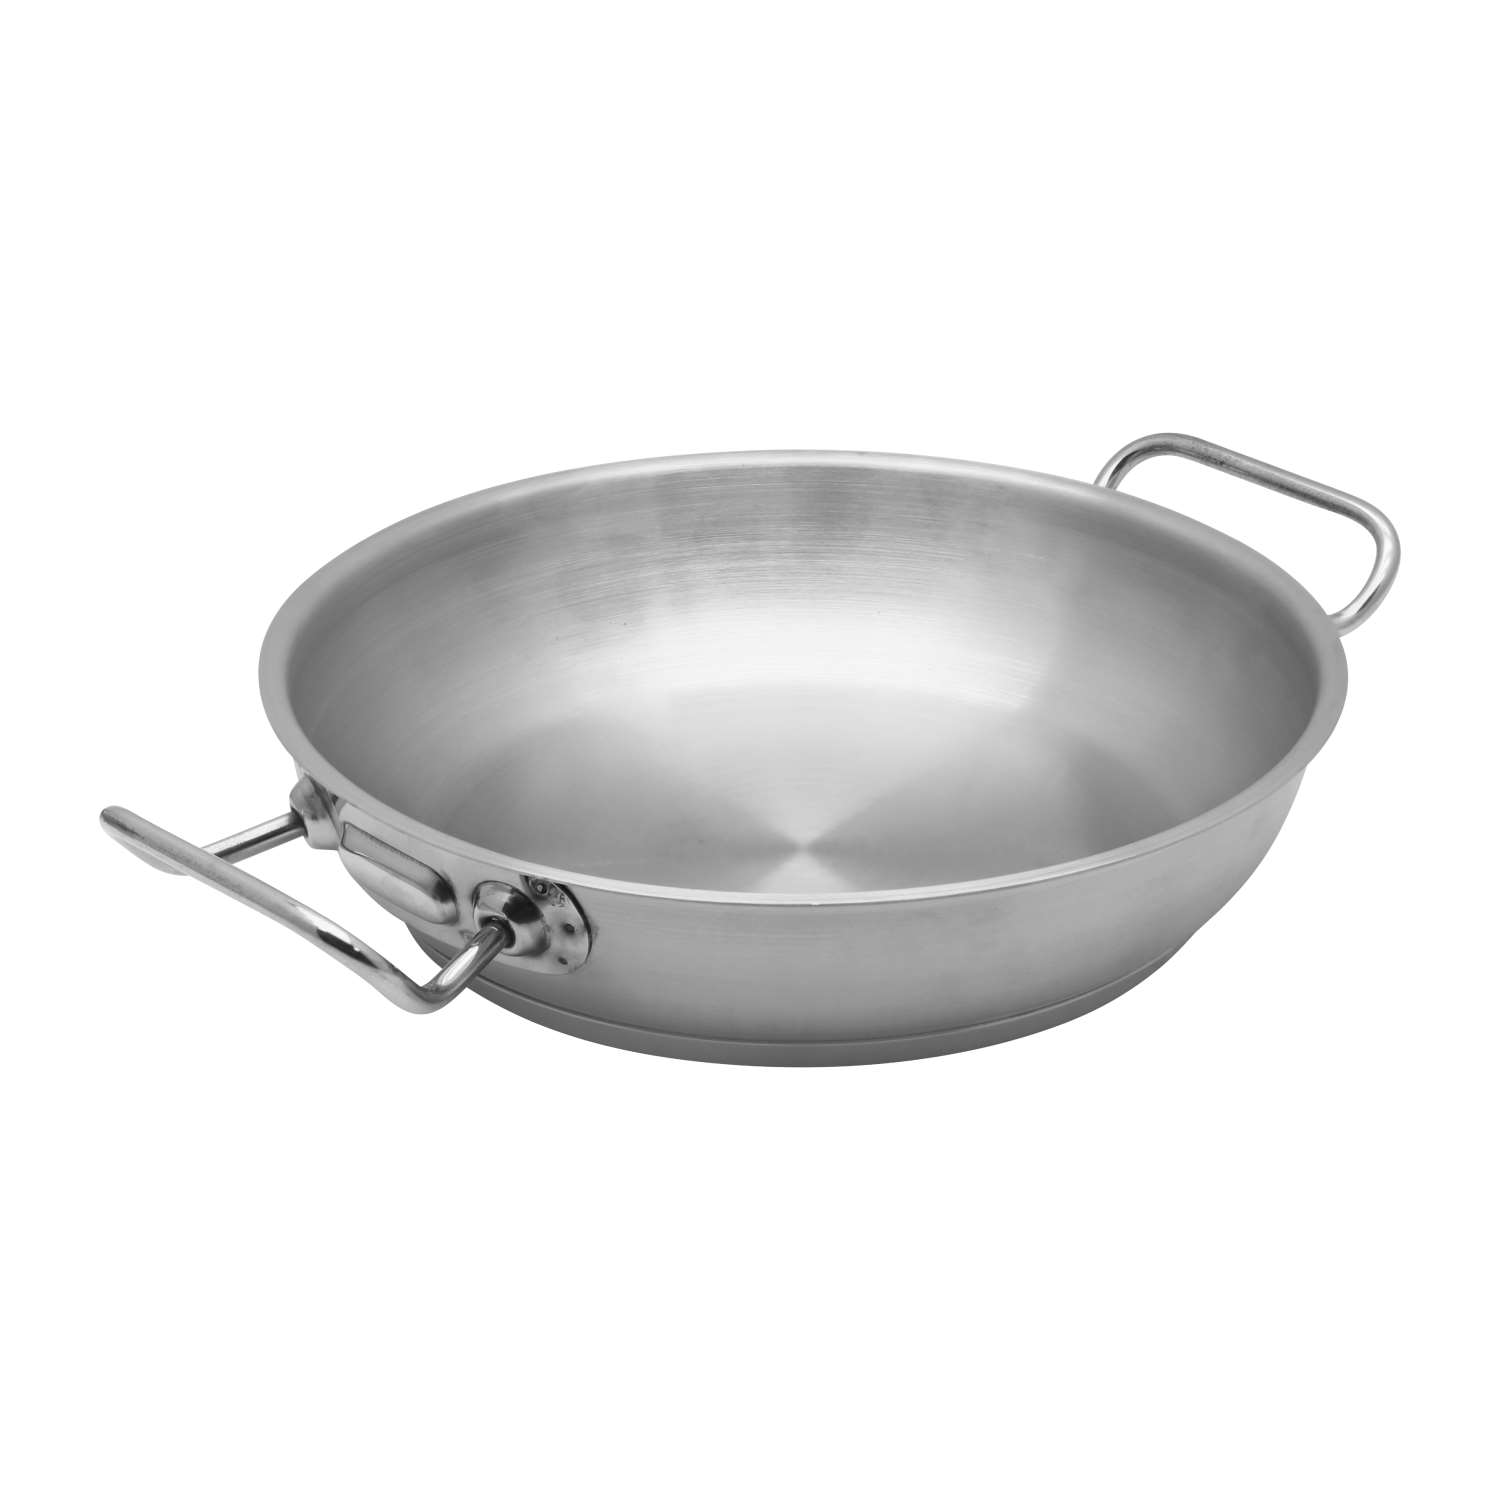 Chefset Steel Fry Pan With Side Handle 20Cm